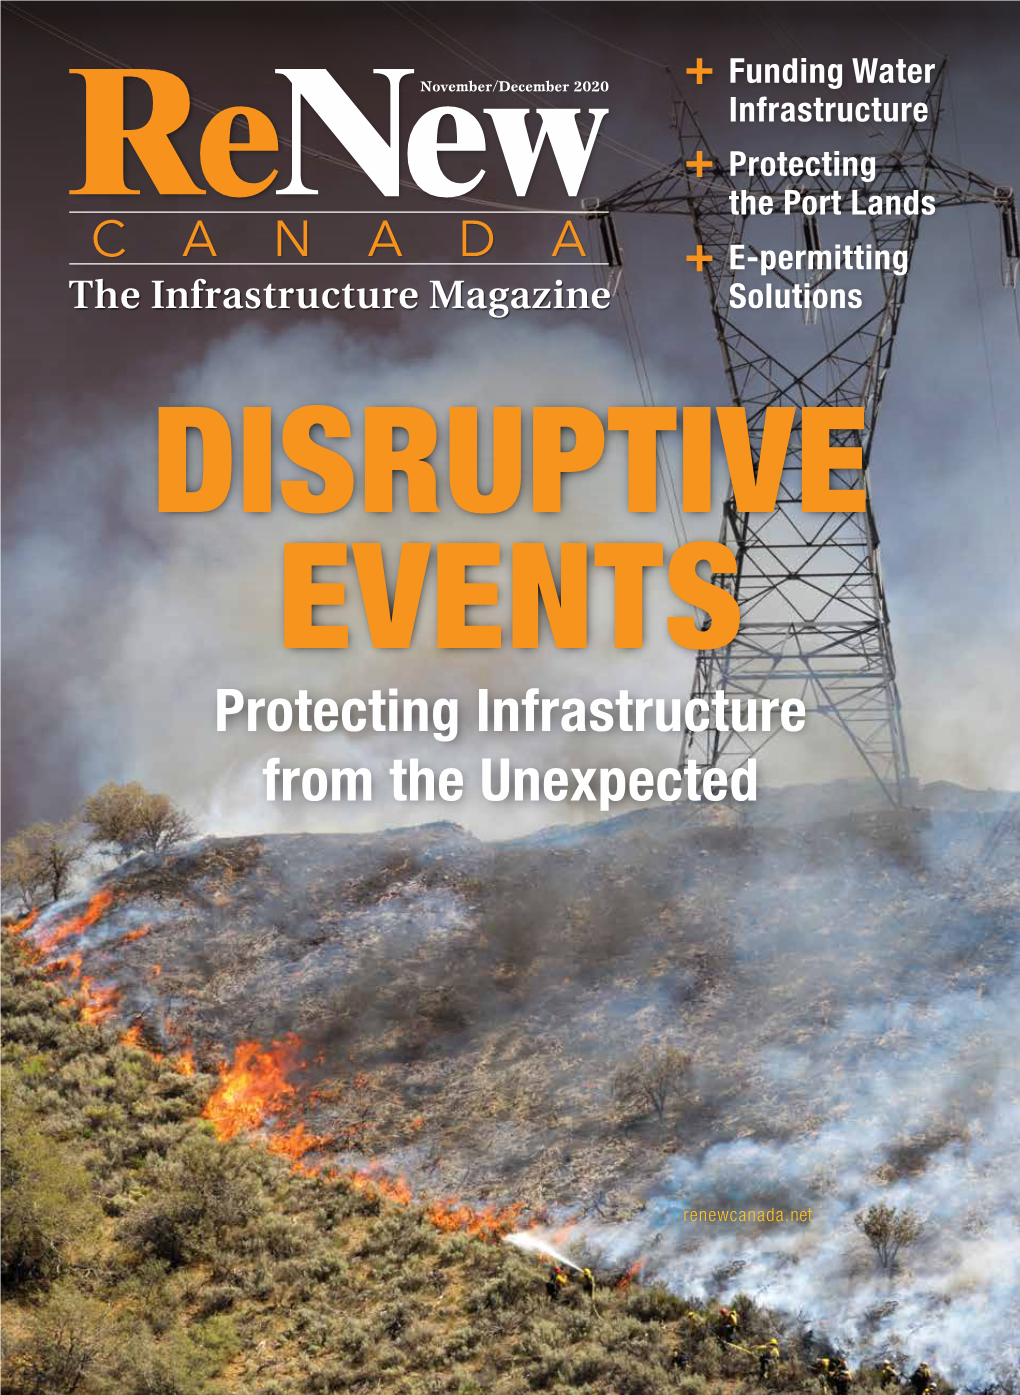 Protecting Infrastructure from the Unexpected